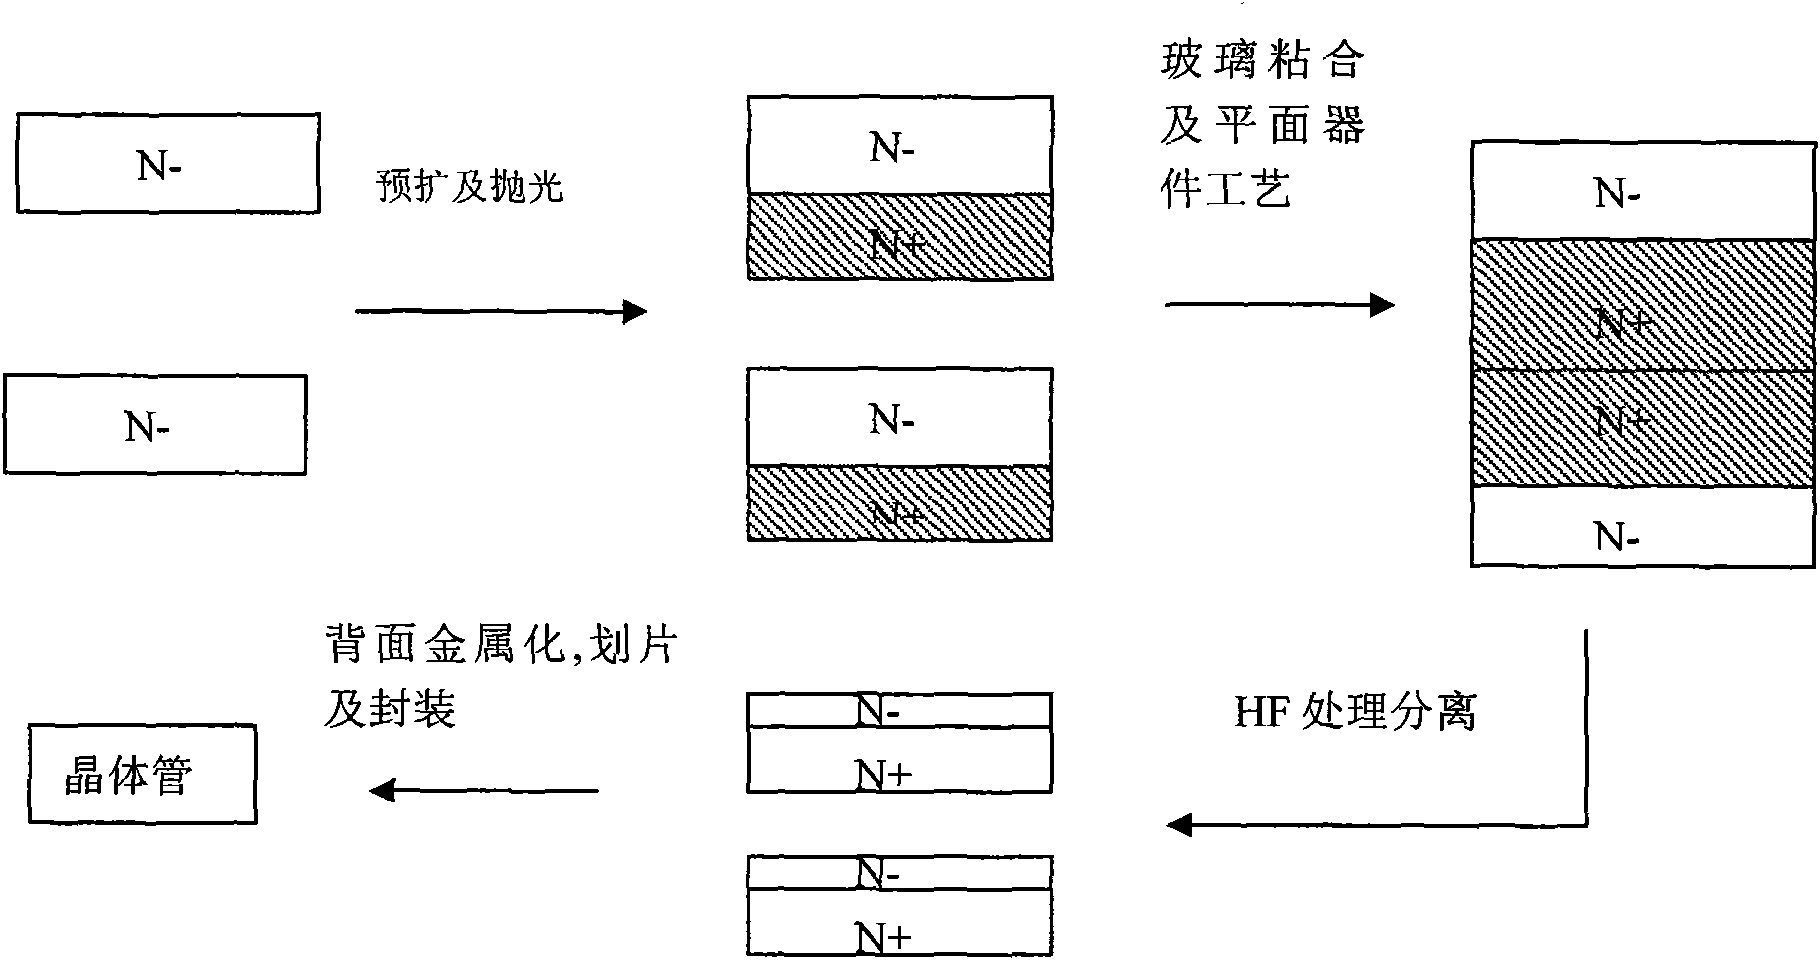 Method for manufacturing transistor by using silicon single crystal slices